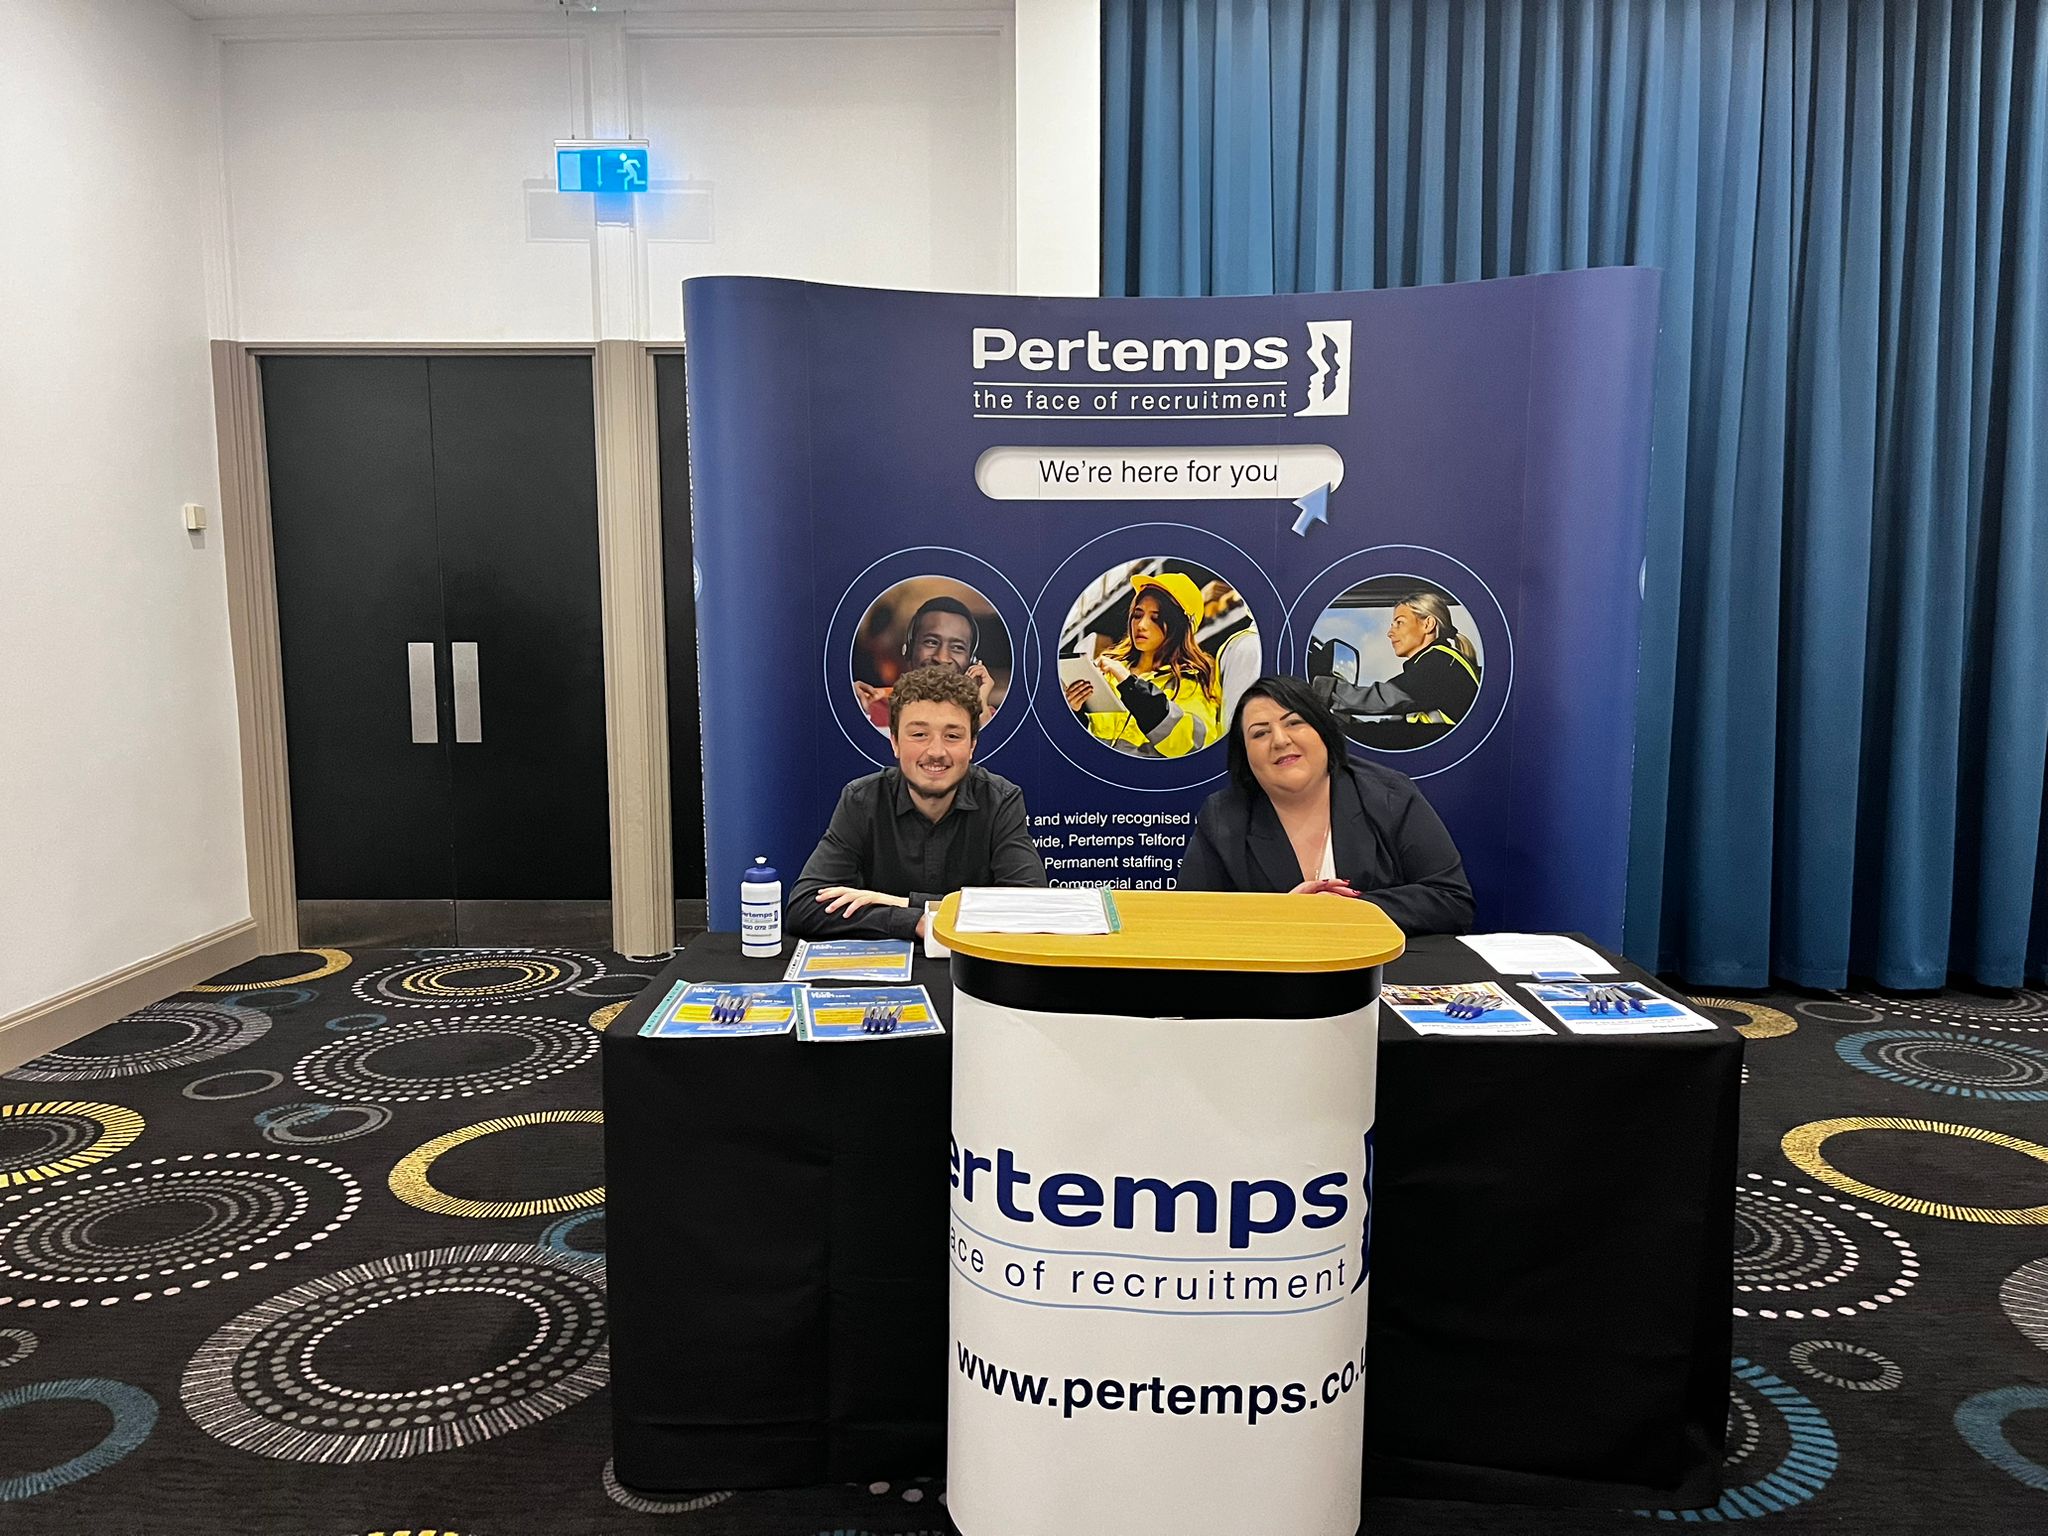 Pertemps at our event in Telford & Shrewsbury